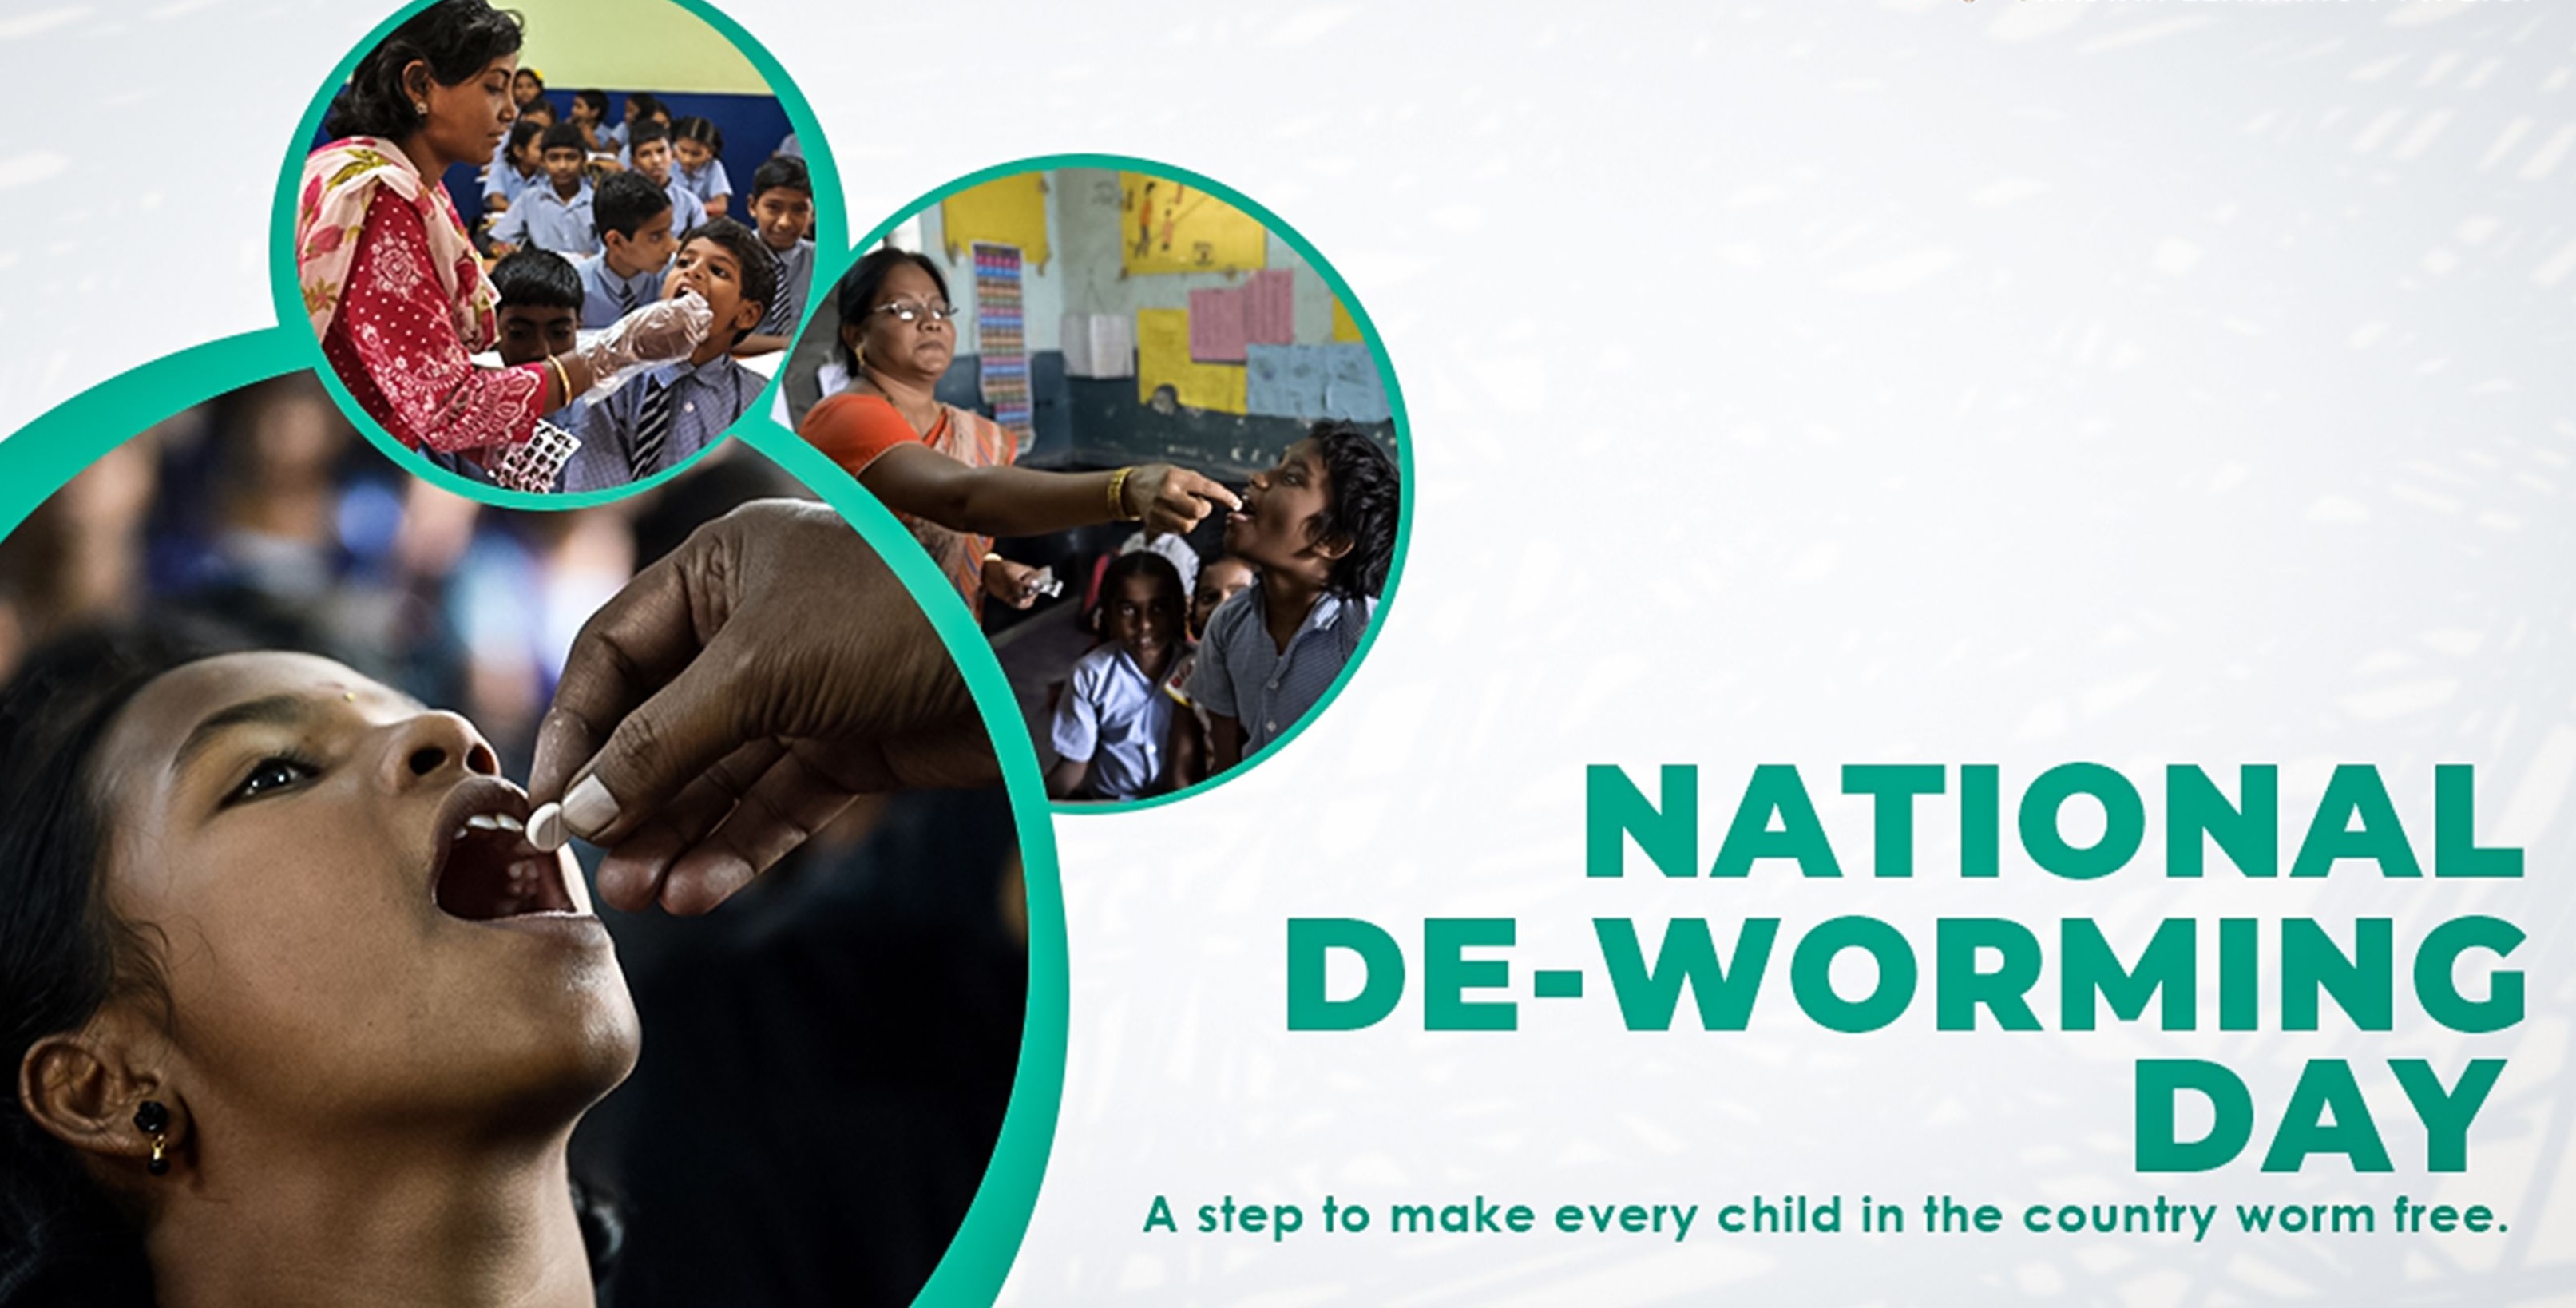 NATIONAL DEWORMING DAY